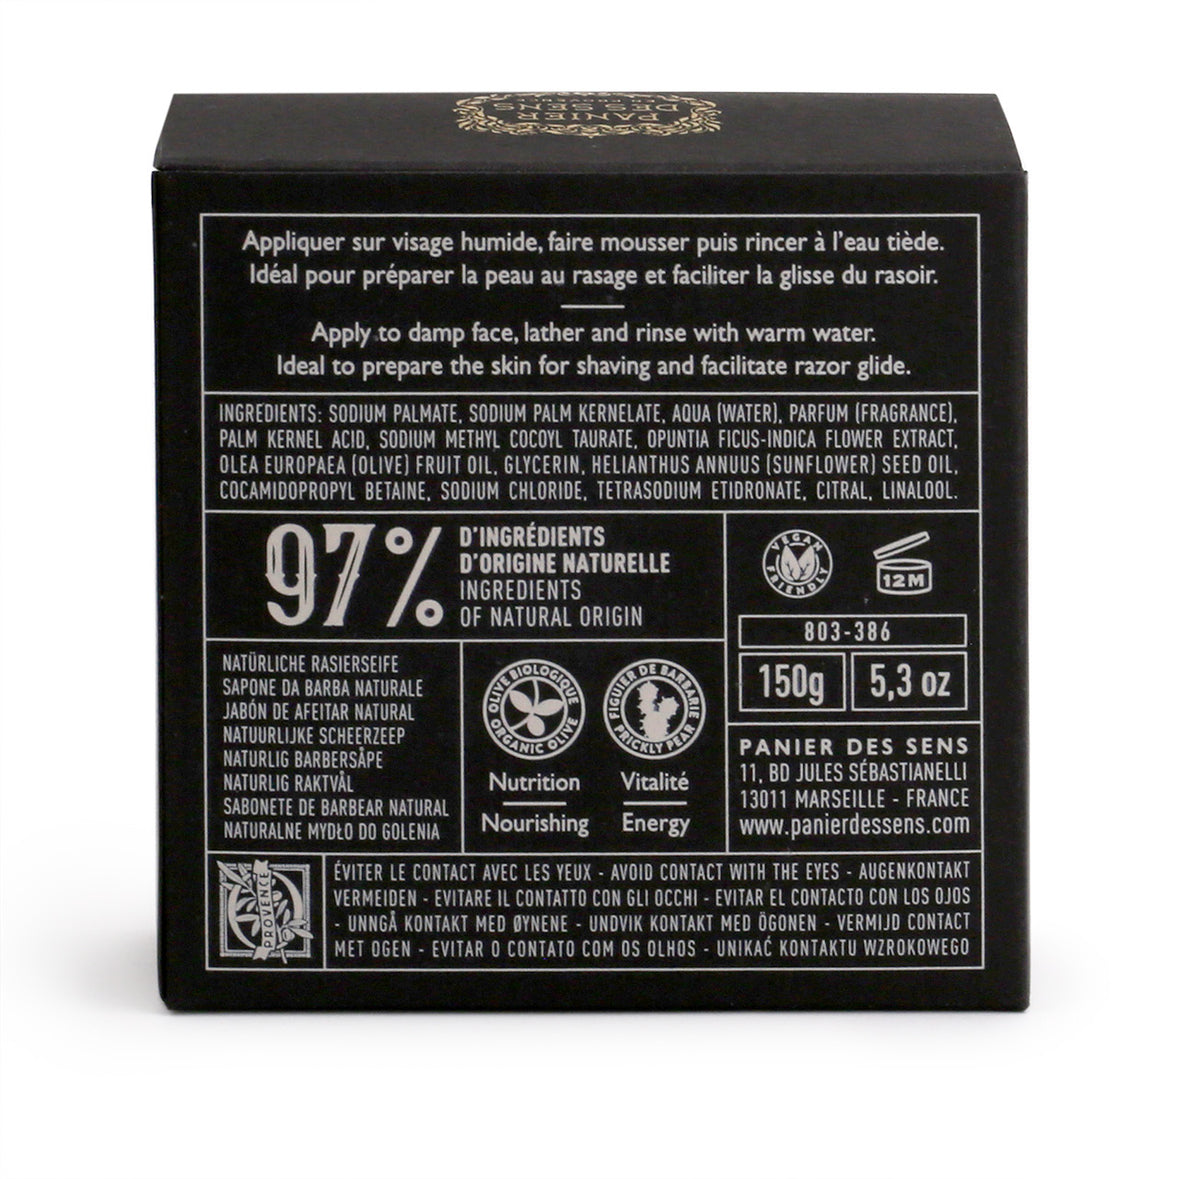 back of the black box showing the specifications of the soap - 97%ingredients of natural origin